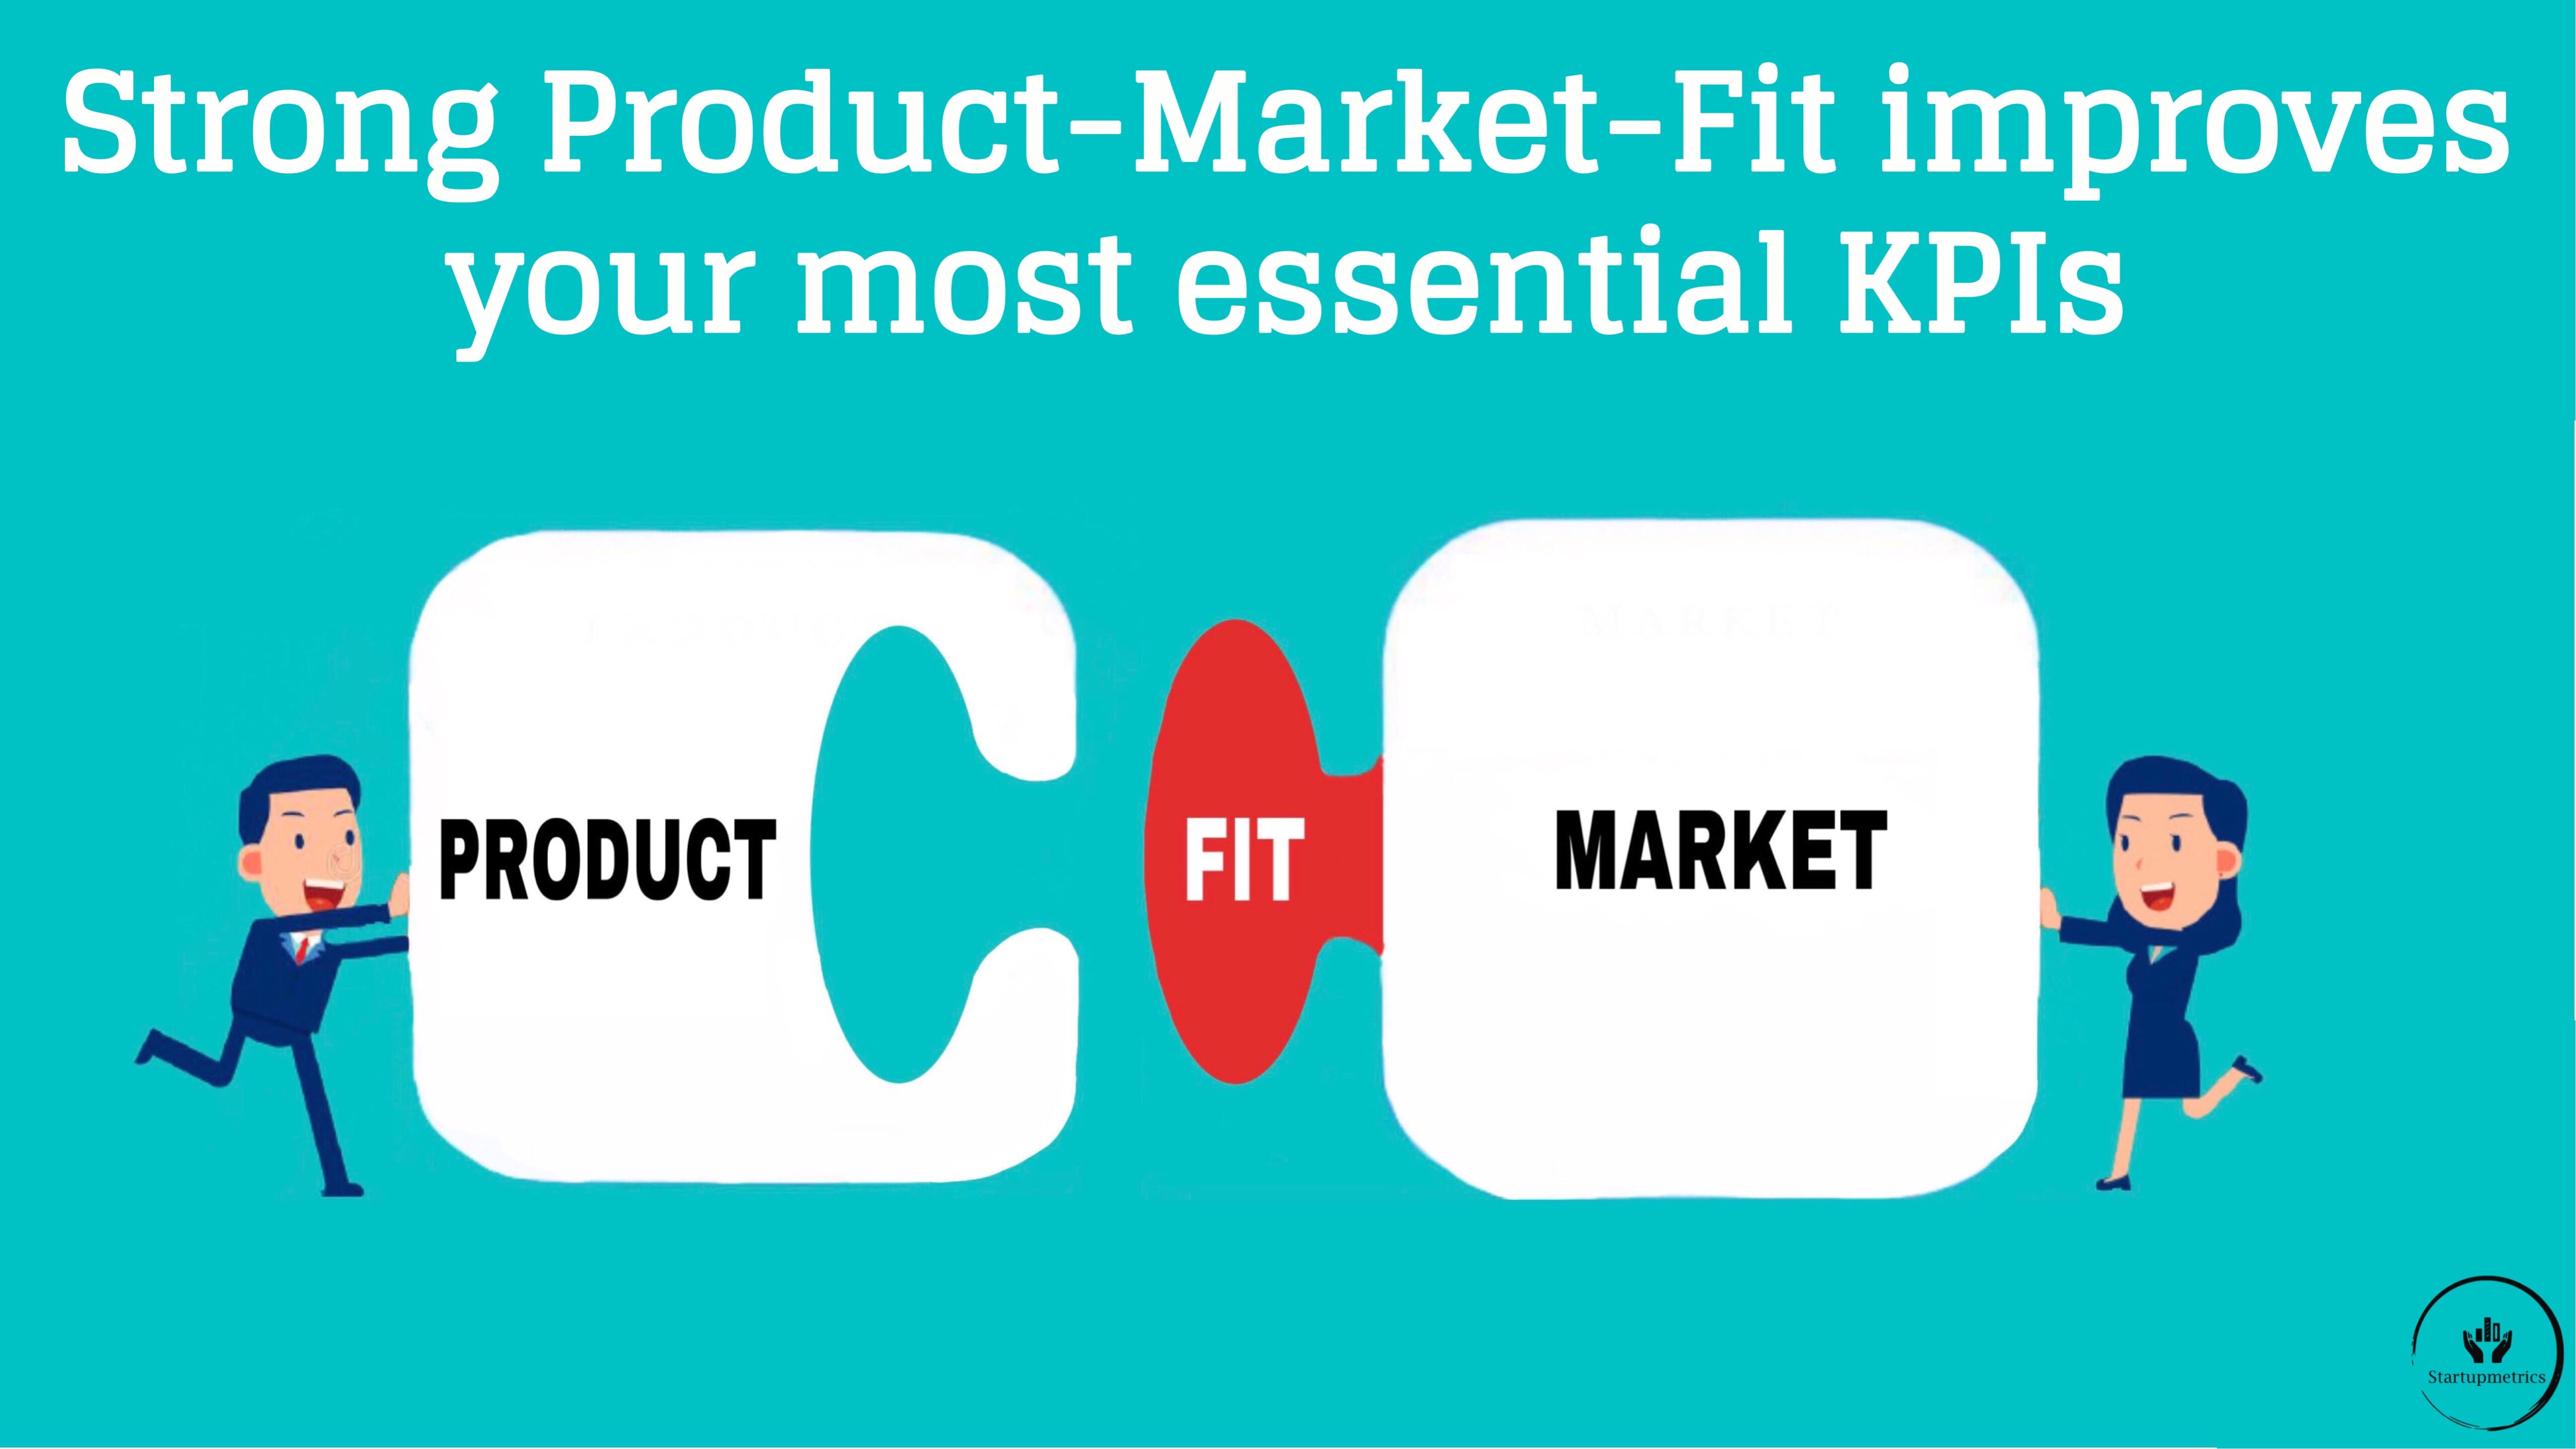 Find Product-Market-Fit to experience exponential Growth